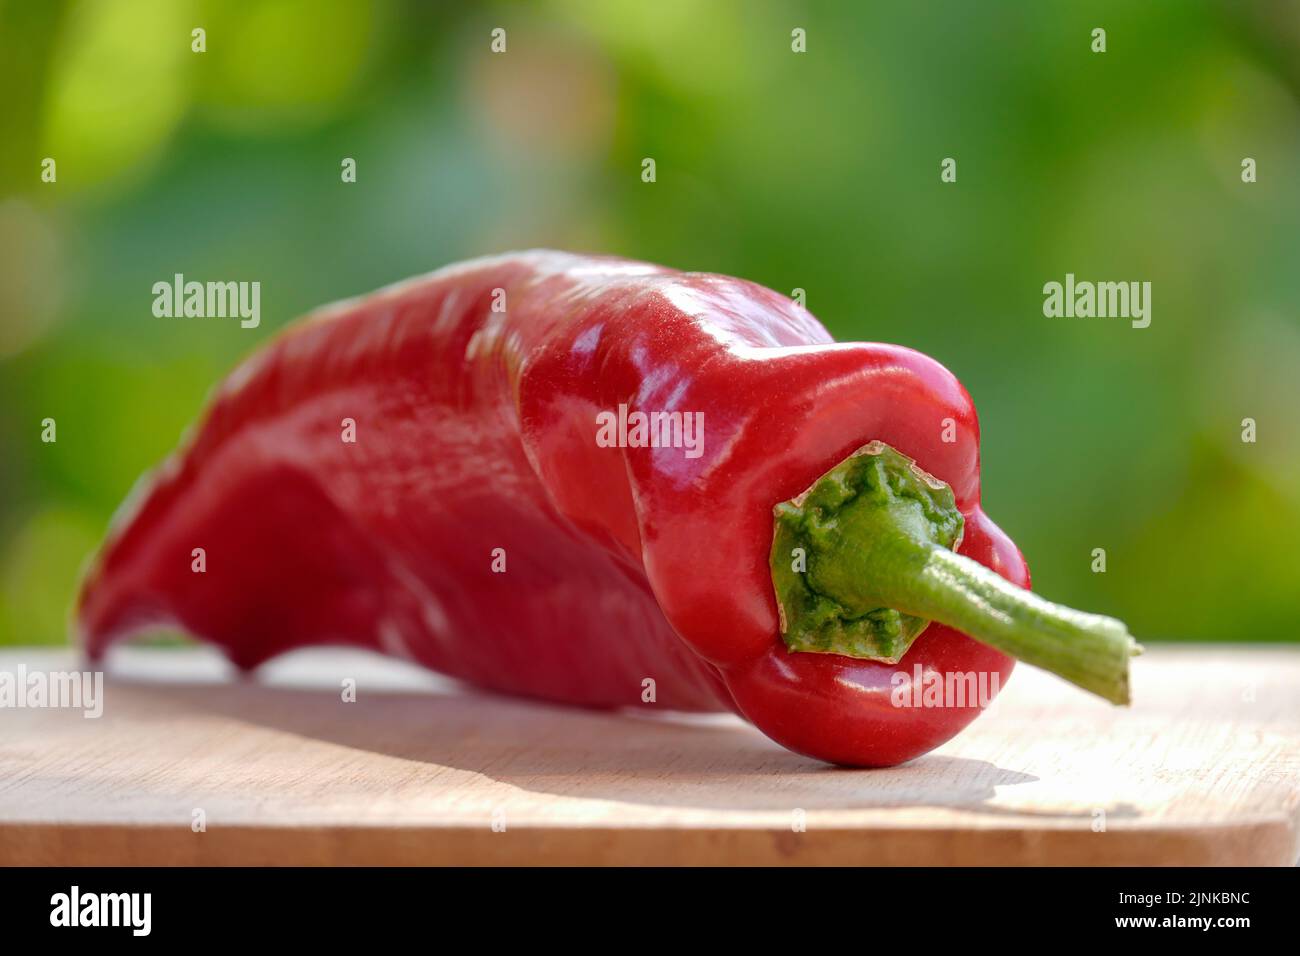 Homegrown organic red bell pepper on wooden table against green foliage background, shot outdoors in direct sunlight Stock Photo